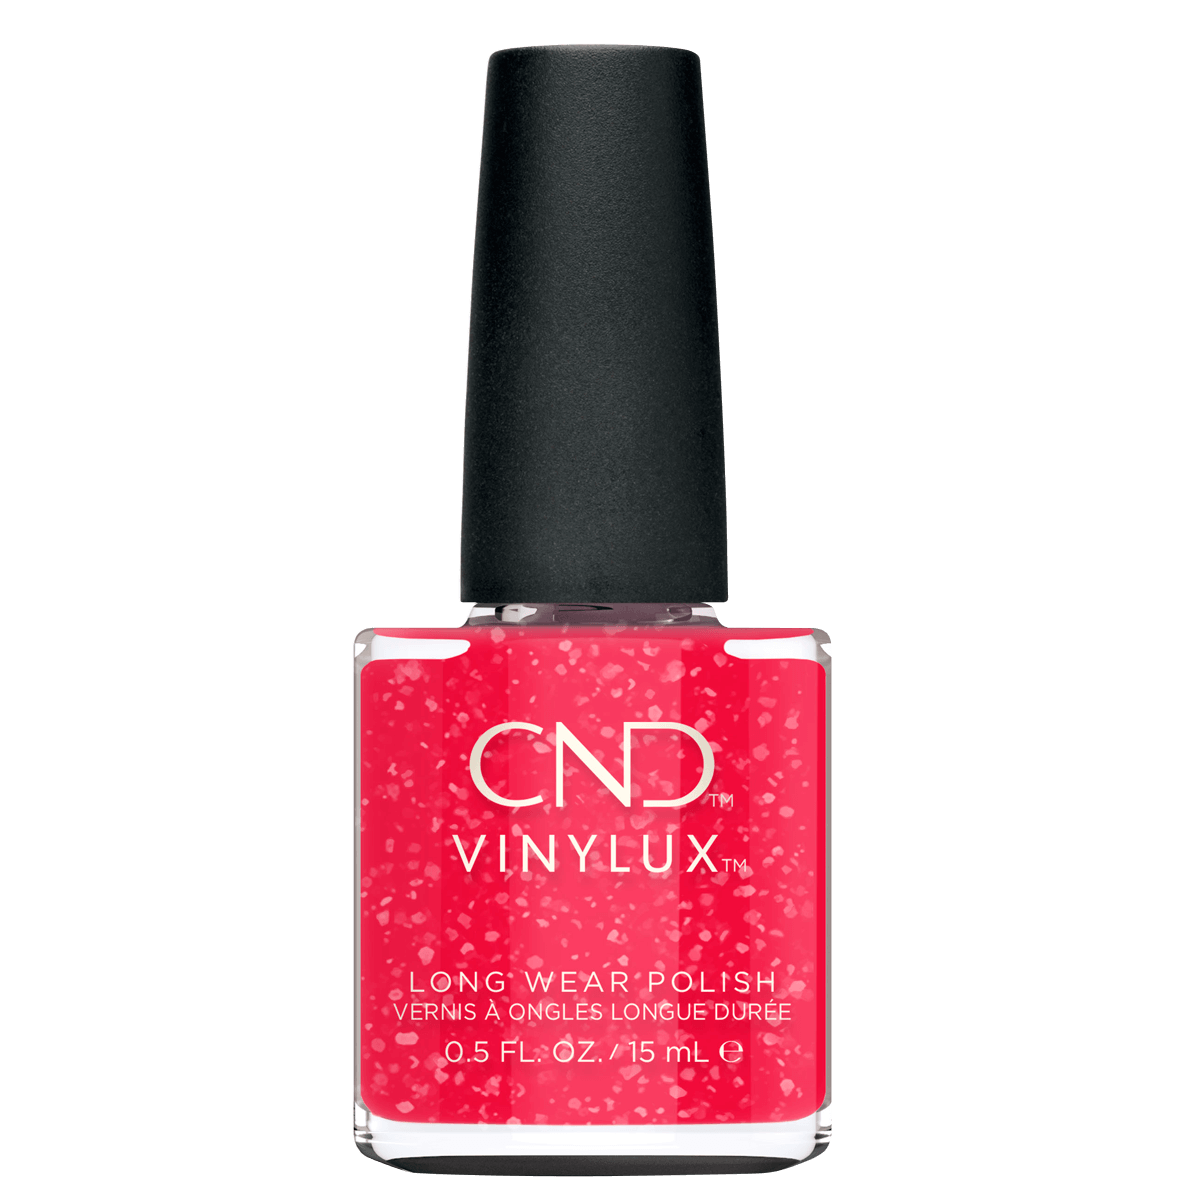 Vinylux CND Nail Polish #447 Outrage-Yes 15mL